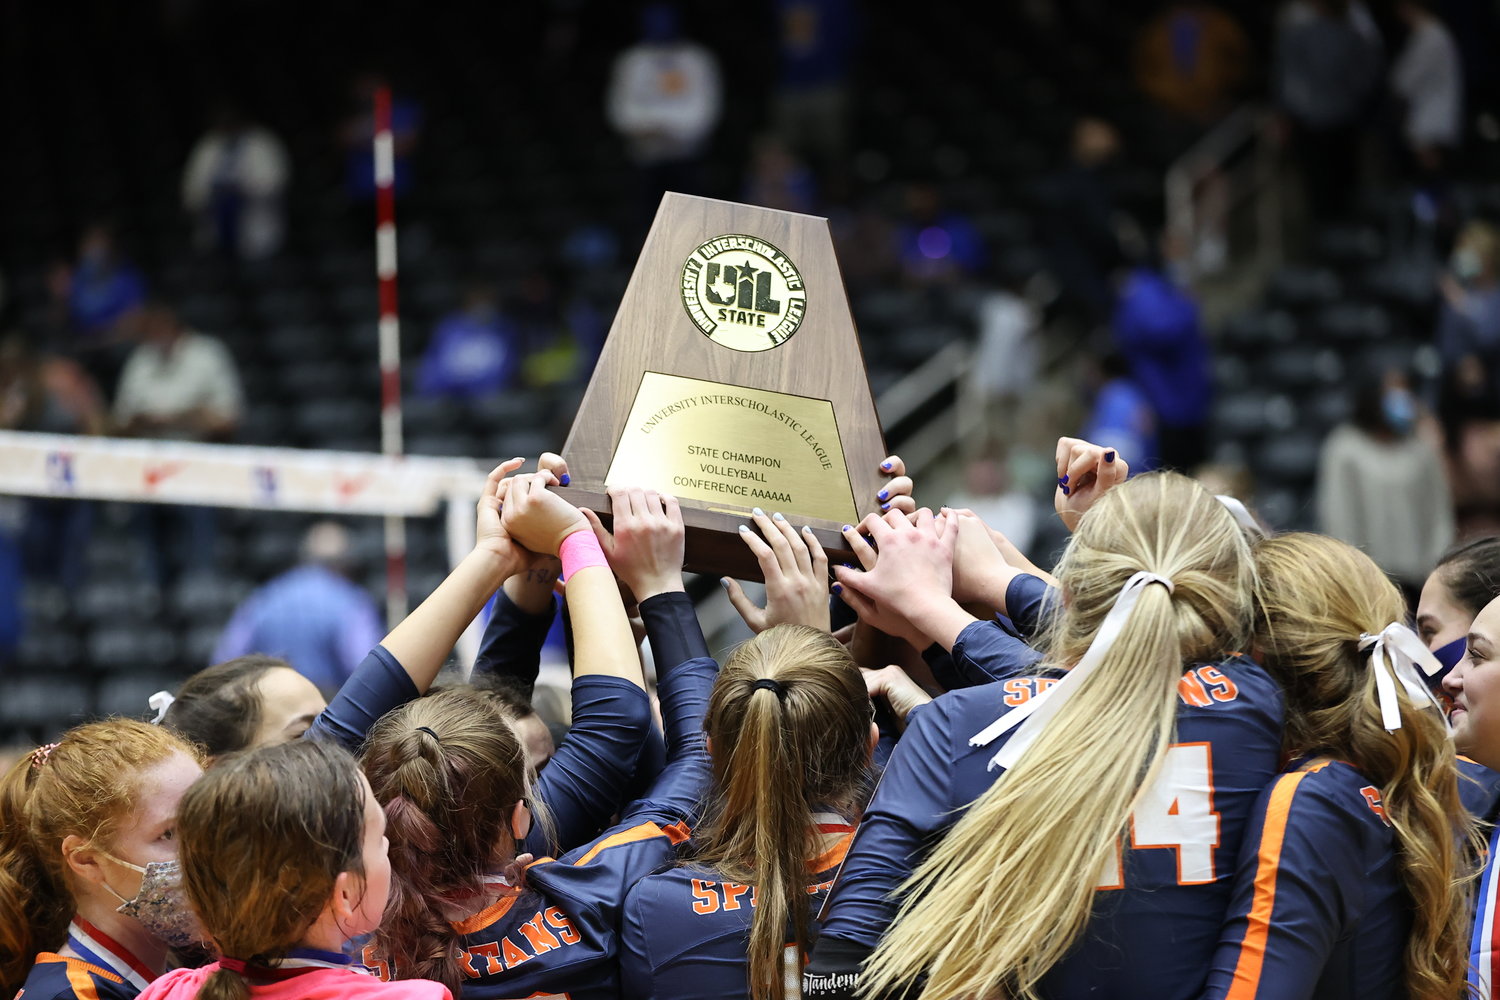 Seven Lakes players celebrate after winning the Class 6A state championship match over Klein on Dec. 12 at the Culwell Center in Garland.